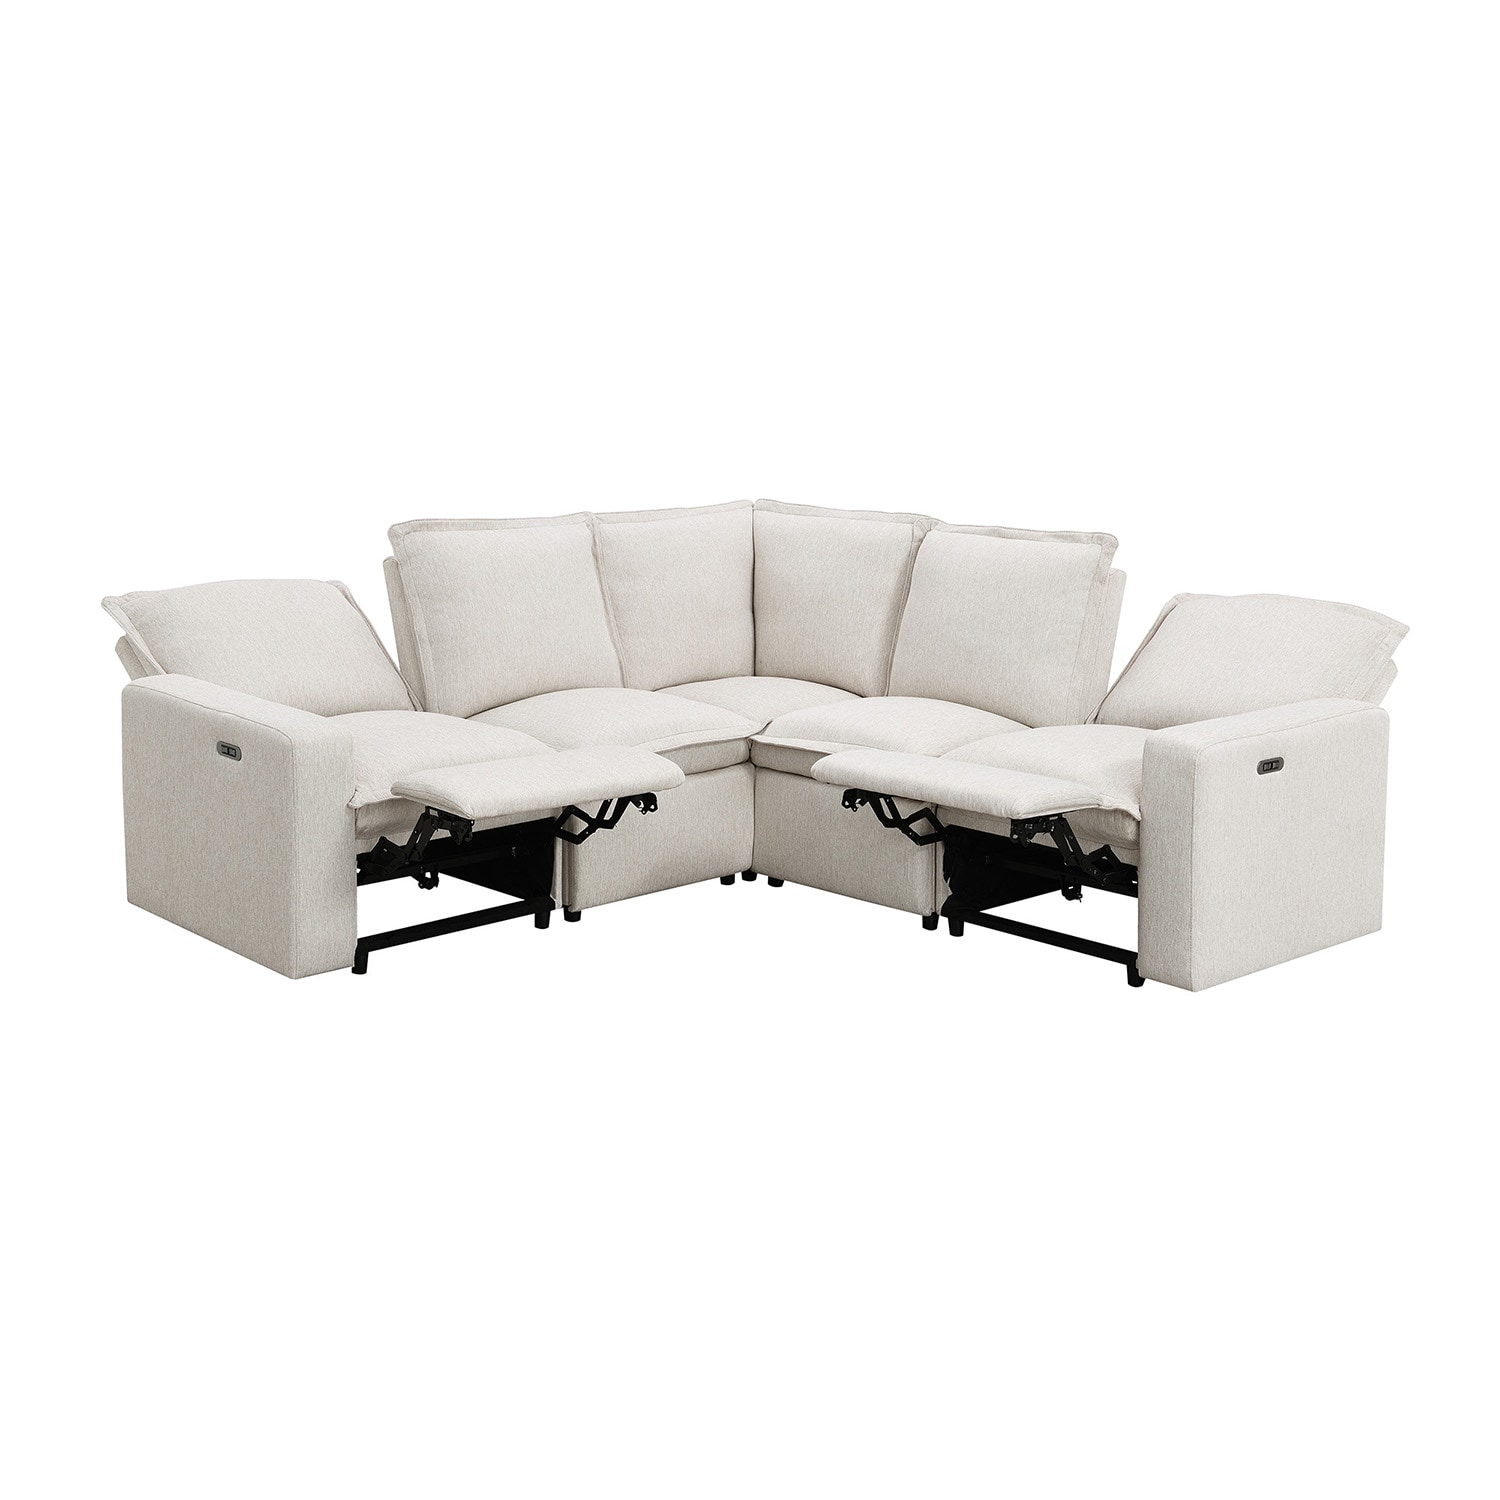 Modern Linen Upholstered Sofa - Storageable Coffee Table, 2 Cupholders, and 2 USB Ports - Beige